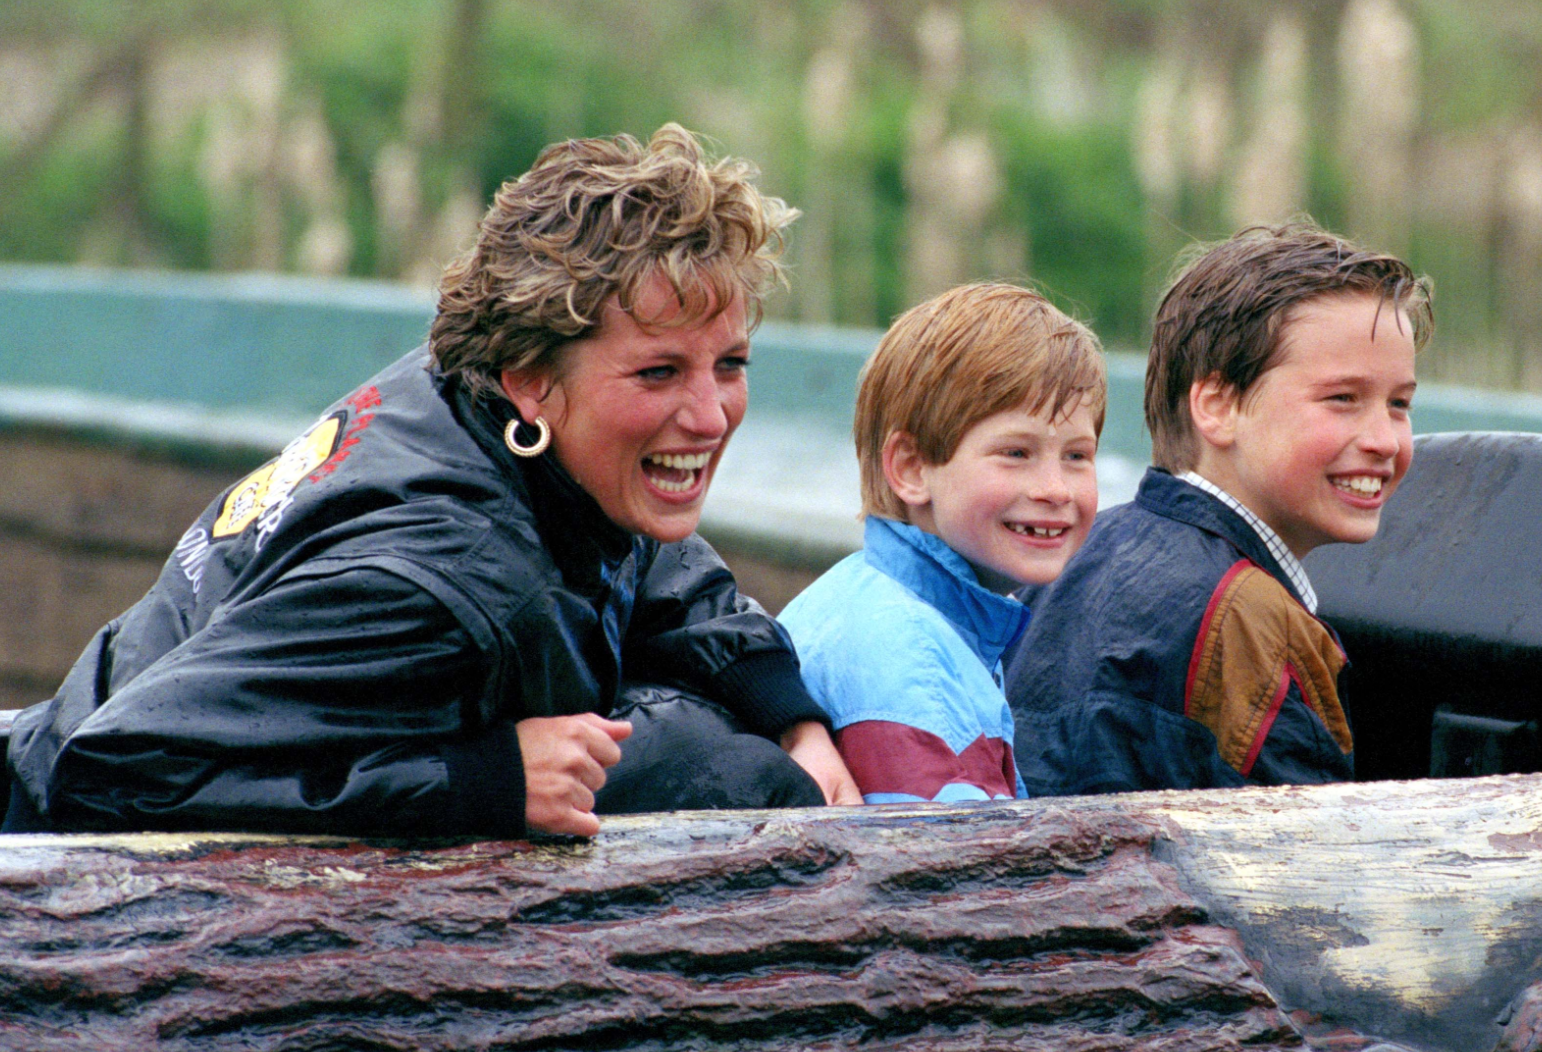 Princess Diana and her sons Prince Harry and Prince William at Thorpe Park in 1993.